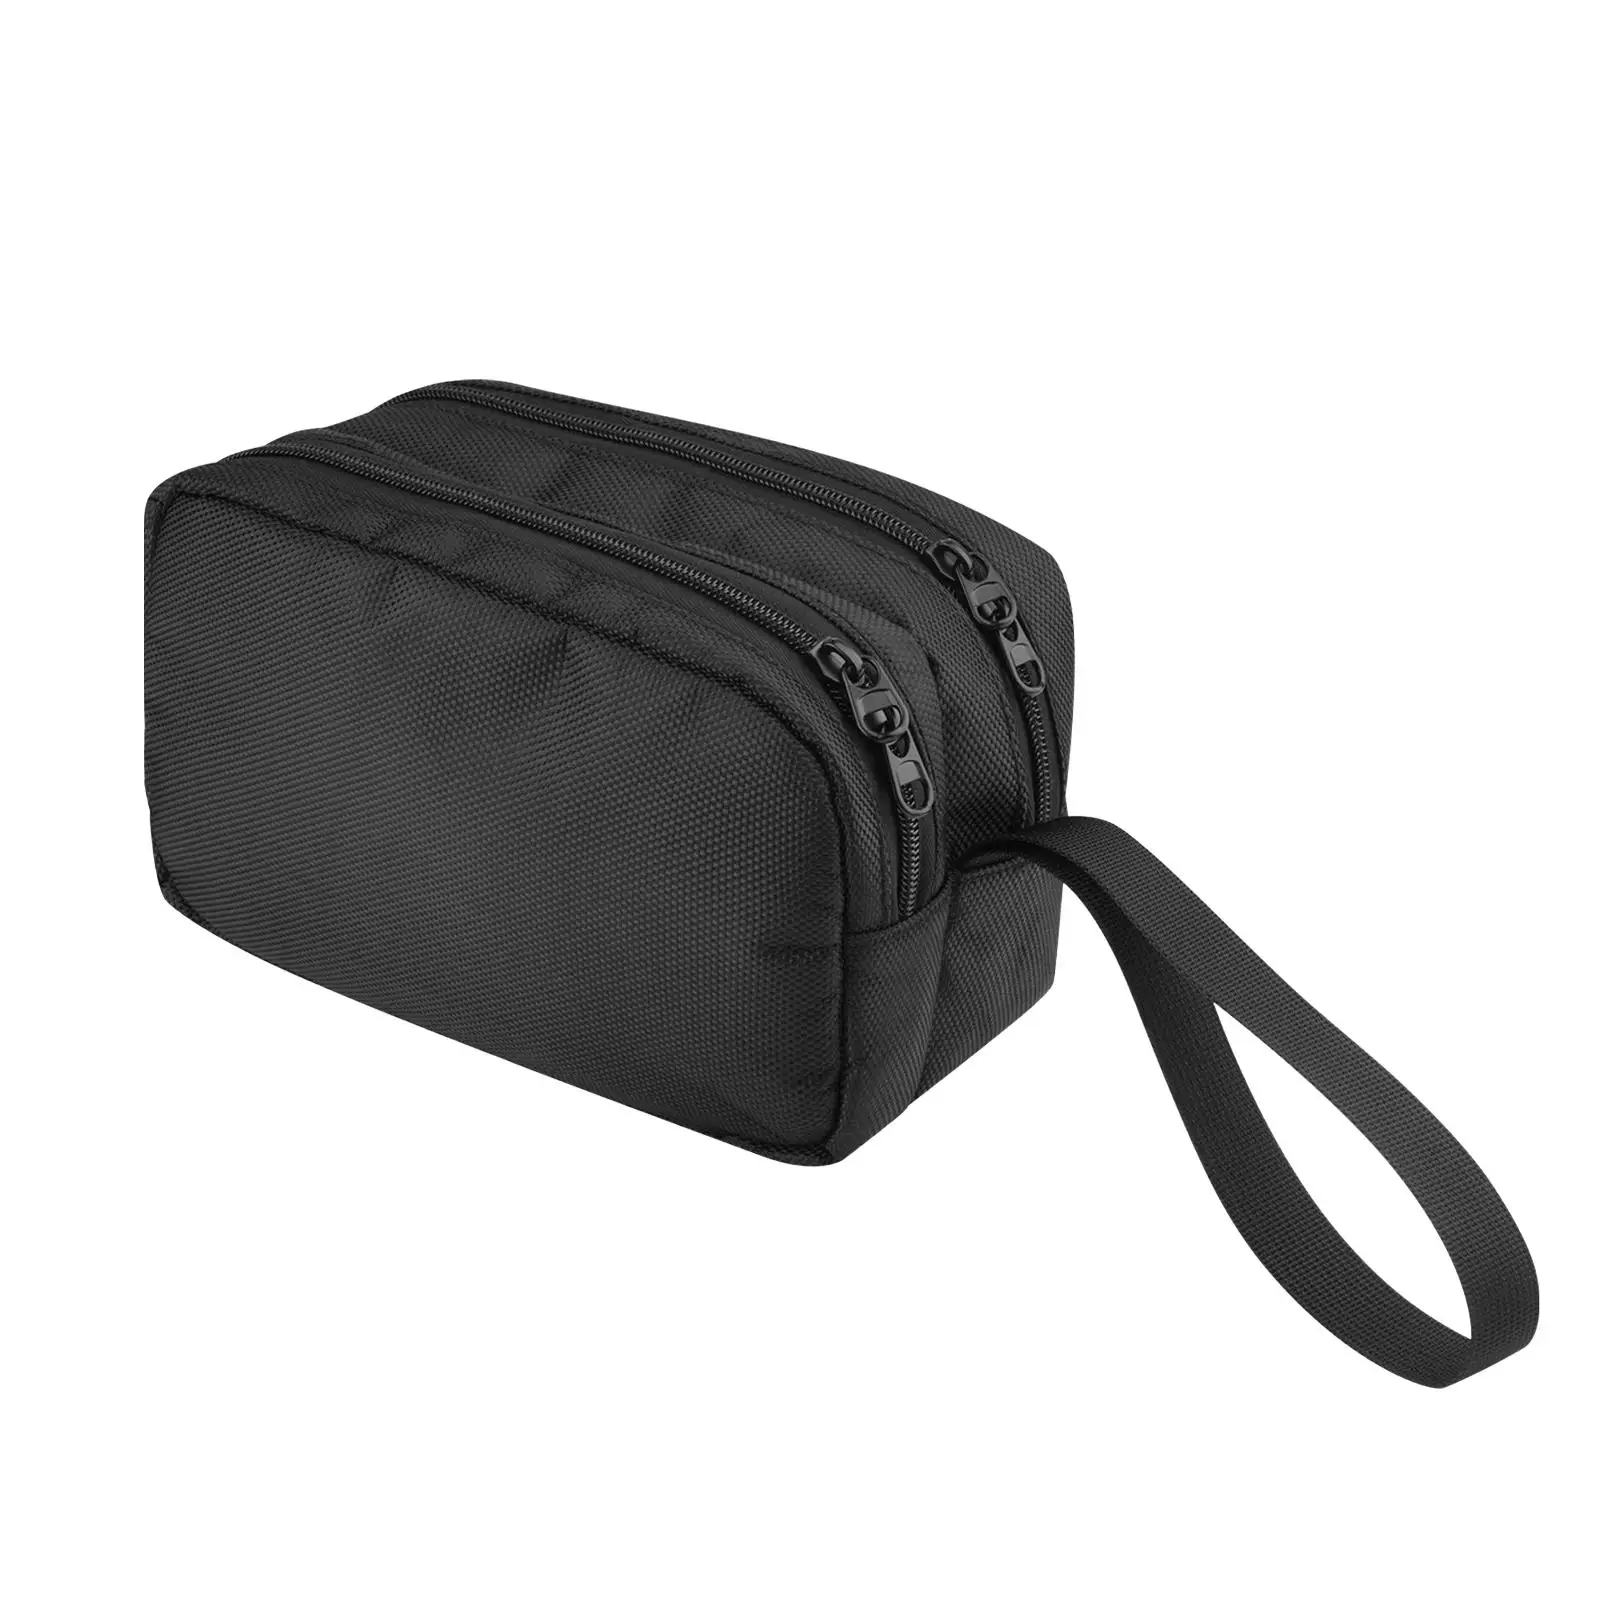 Black Carrying Case Electronics Accessories Organizer Bag for USB Cable